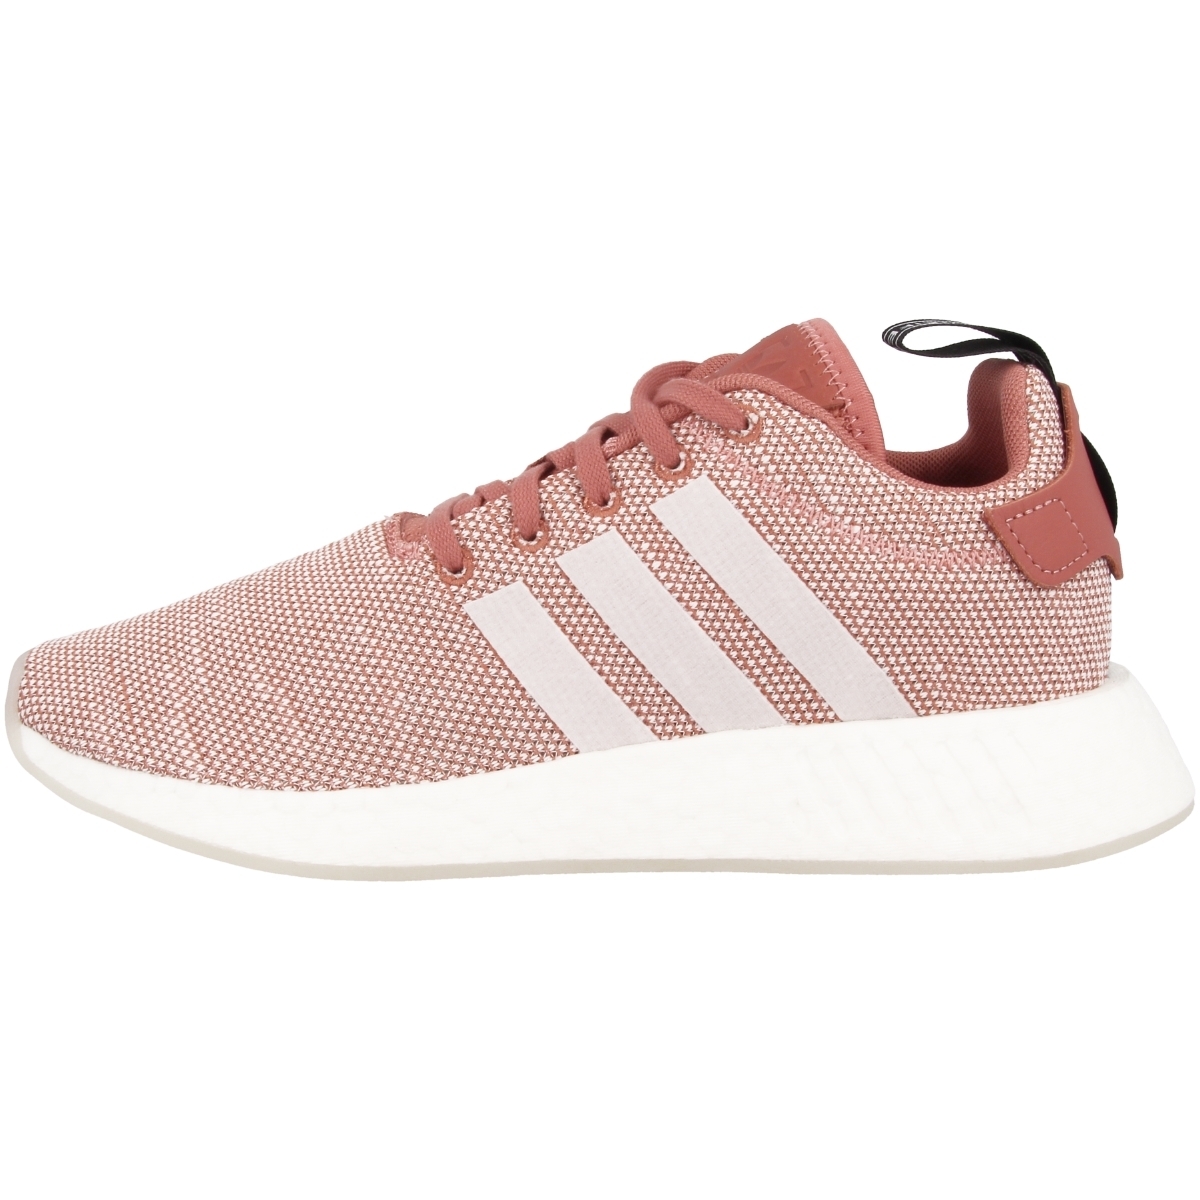 Adidas NMD_R2 W Sneaker low pink